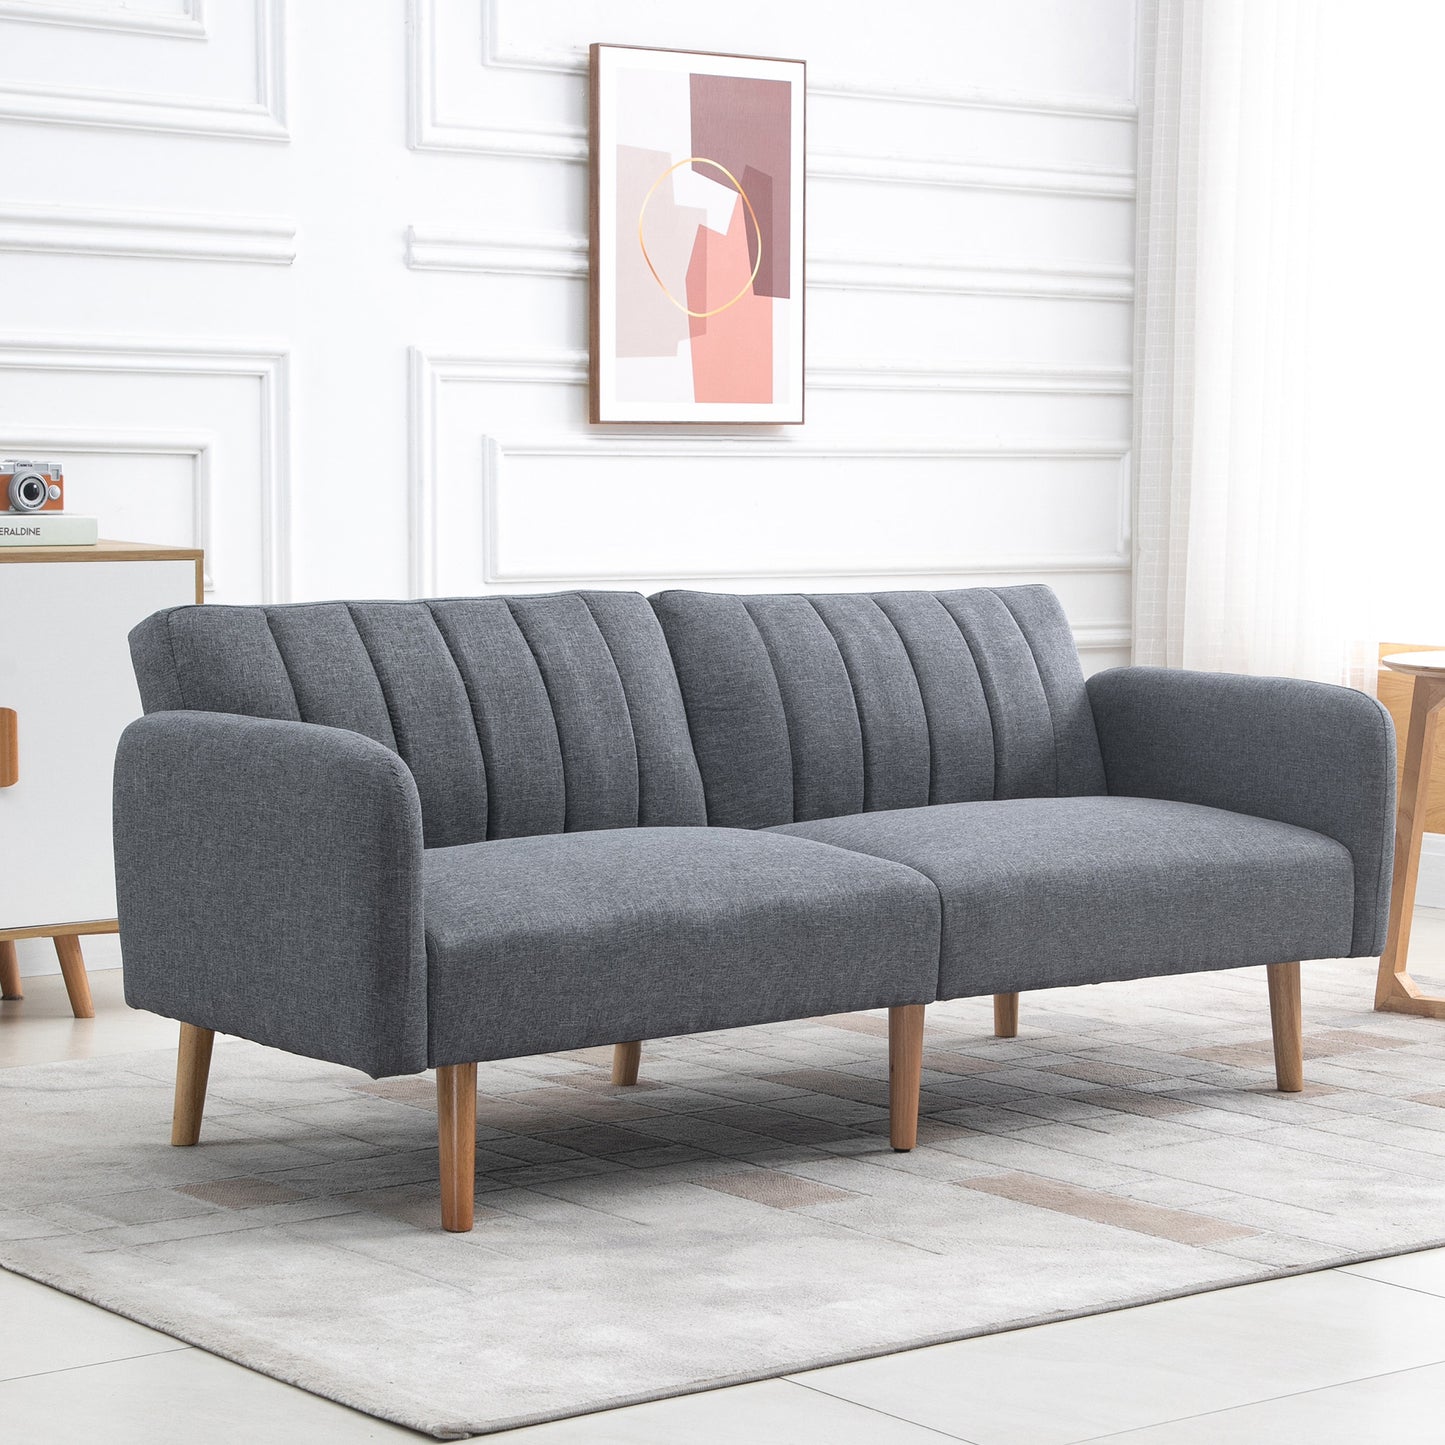 HOMCOM Two-Seater Sofa Bed, with Split Back - Grey